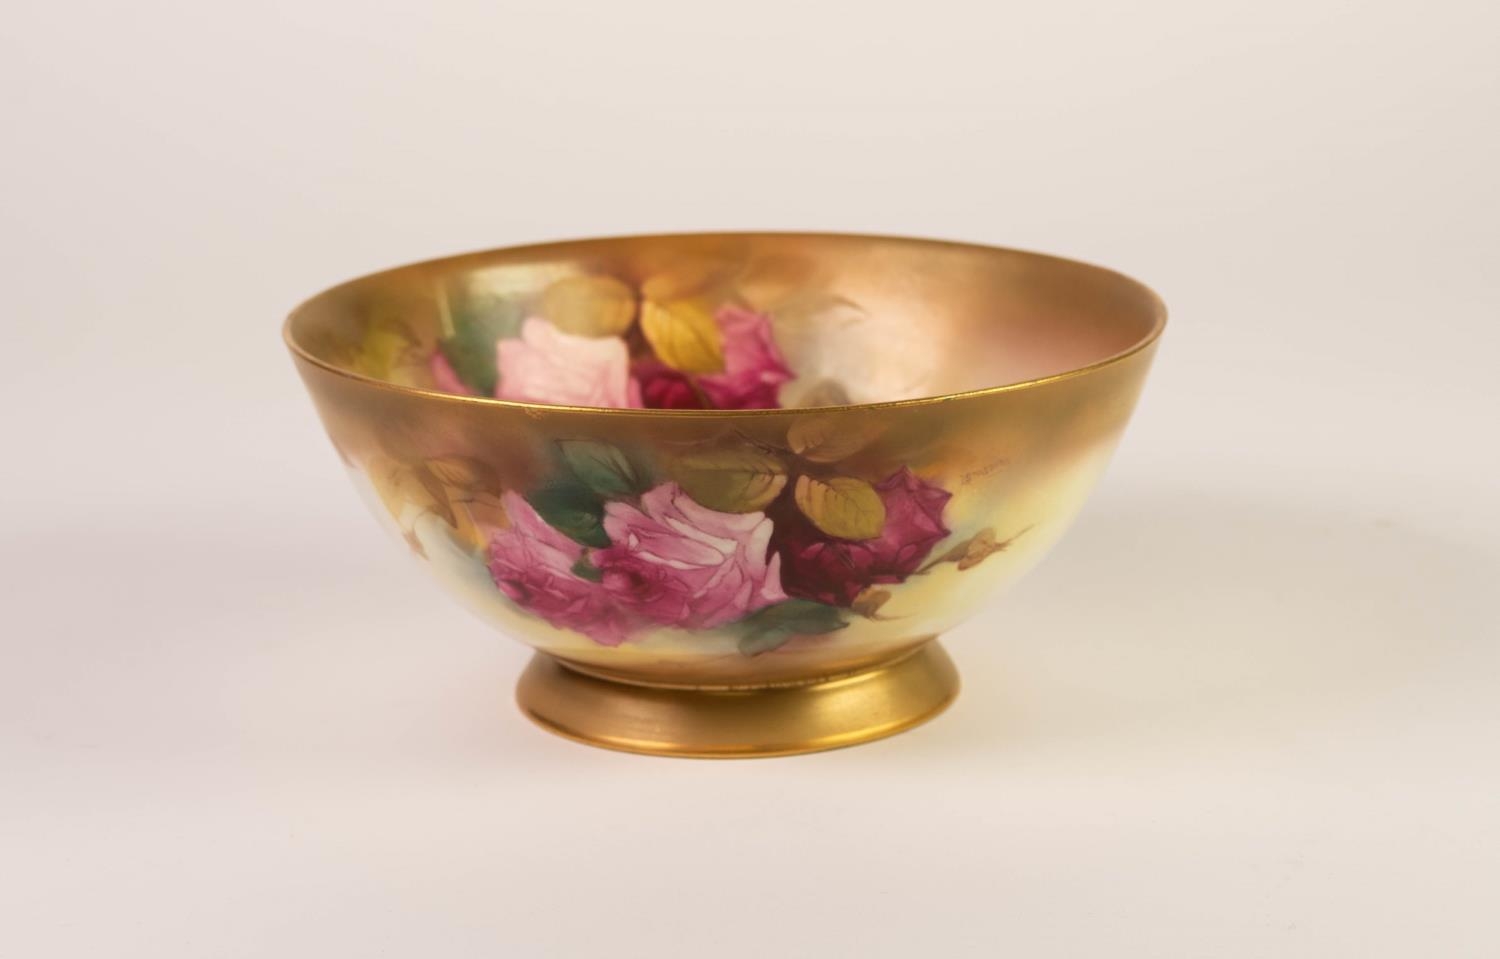 EARLY 20th CENTURY ROYAL WORCESTER PORCELAIN BOWL, painted with roses, signed E Spilsbury, printed